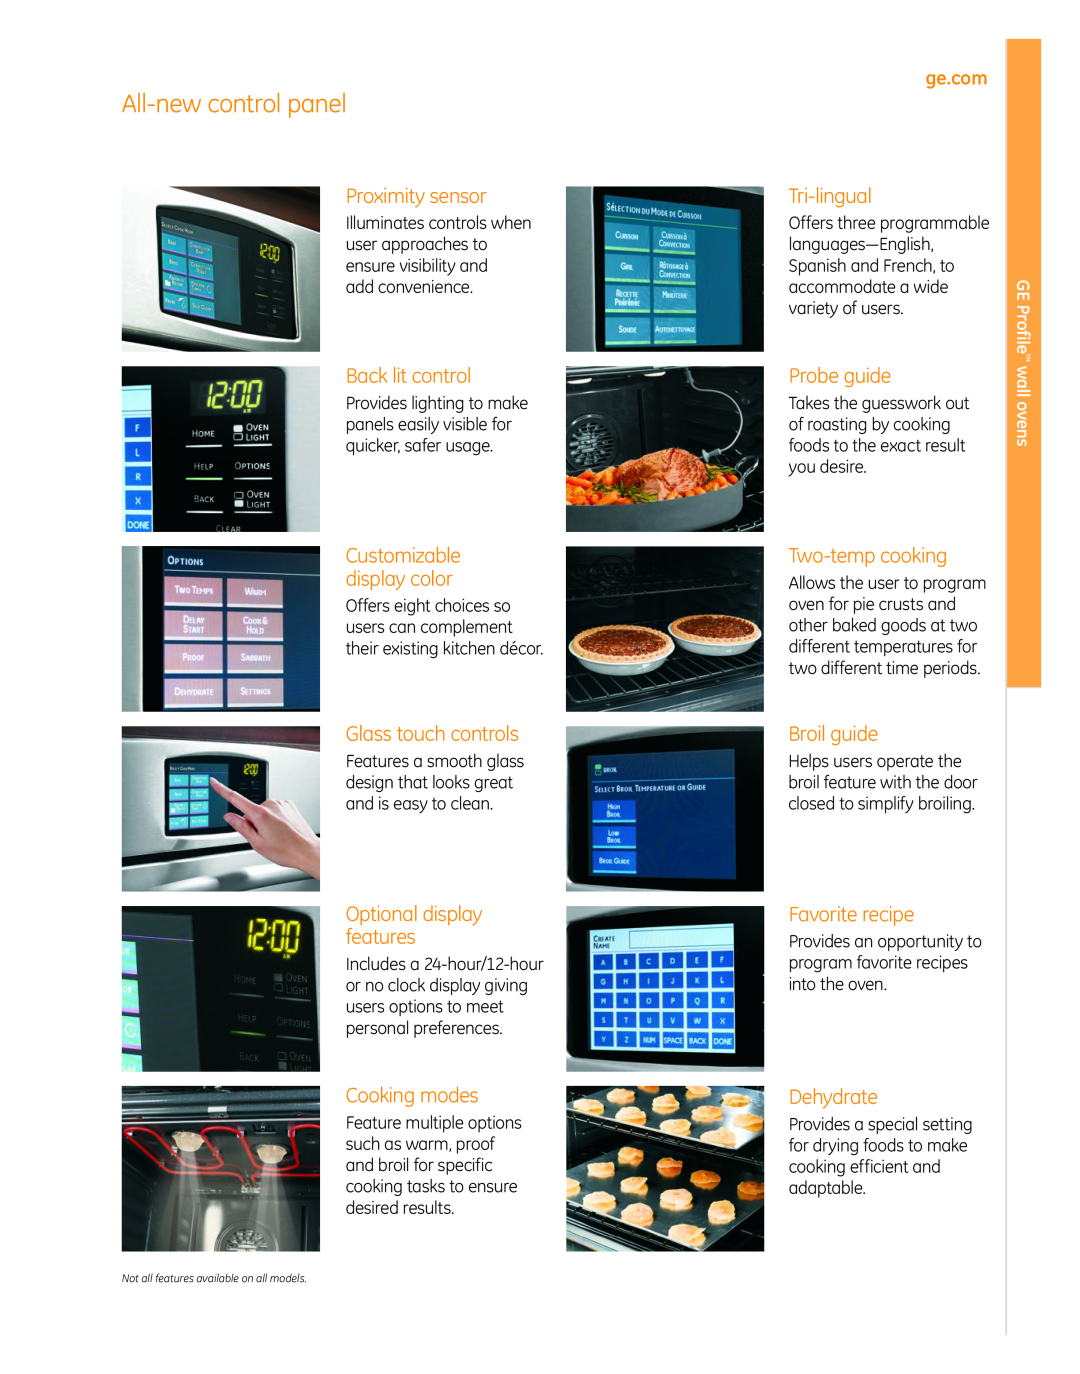 GE PT920, PT960 All-newcontrol panel, Proximity sensor, Back lit control, Customizable display color, Glass touch controls 